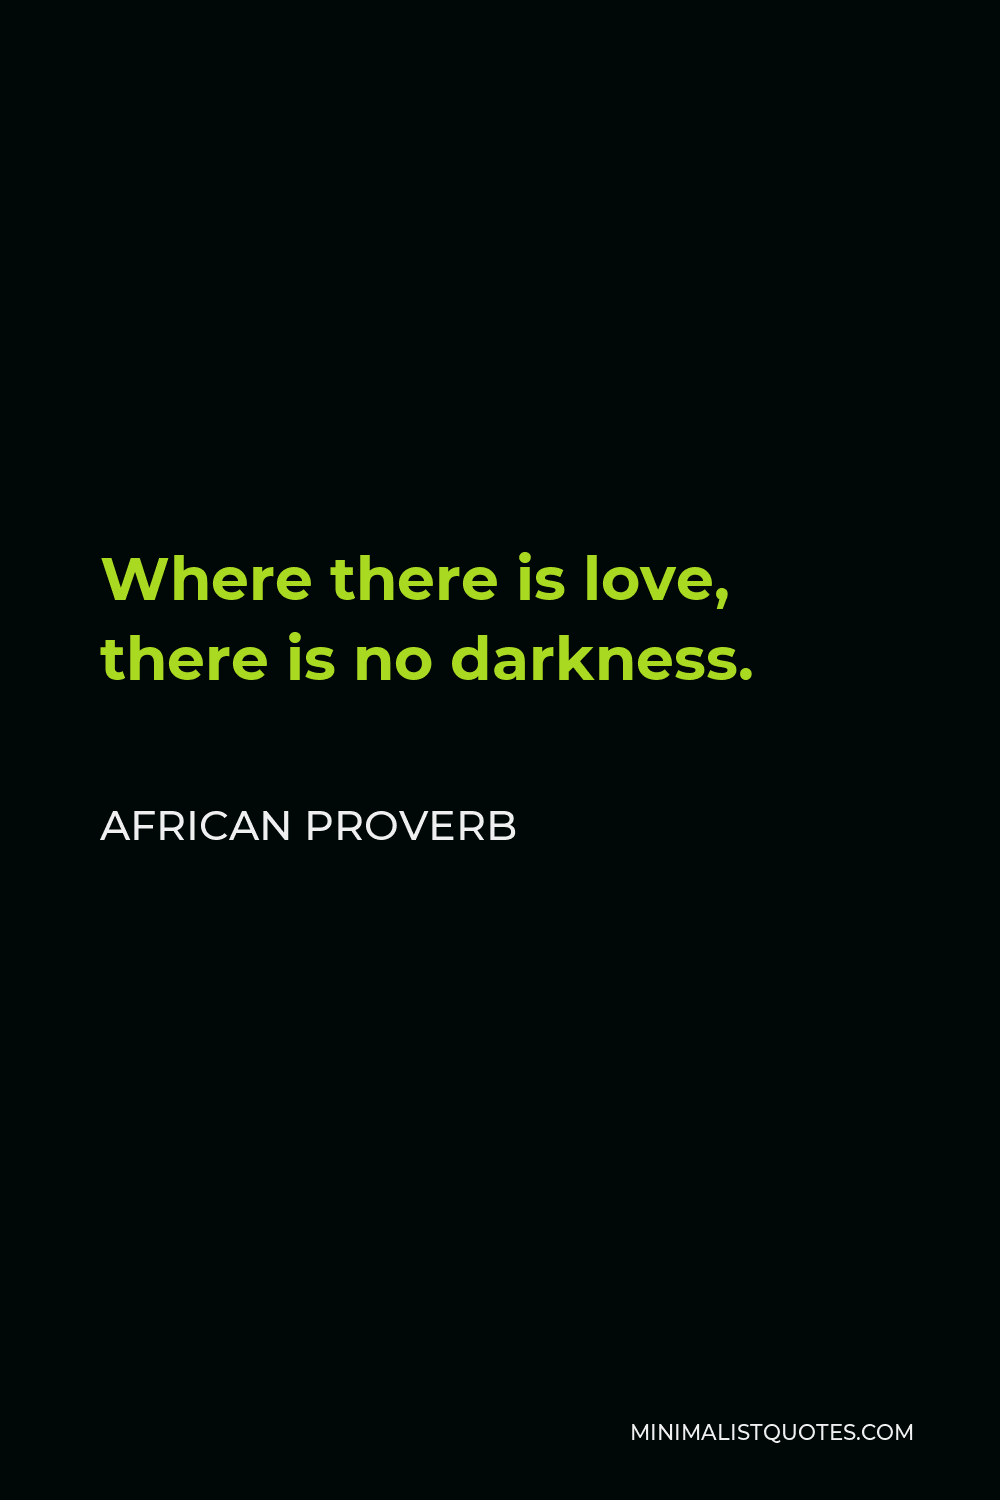 African Proverb Quote - Where there is love, there is no darkness.